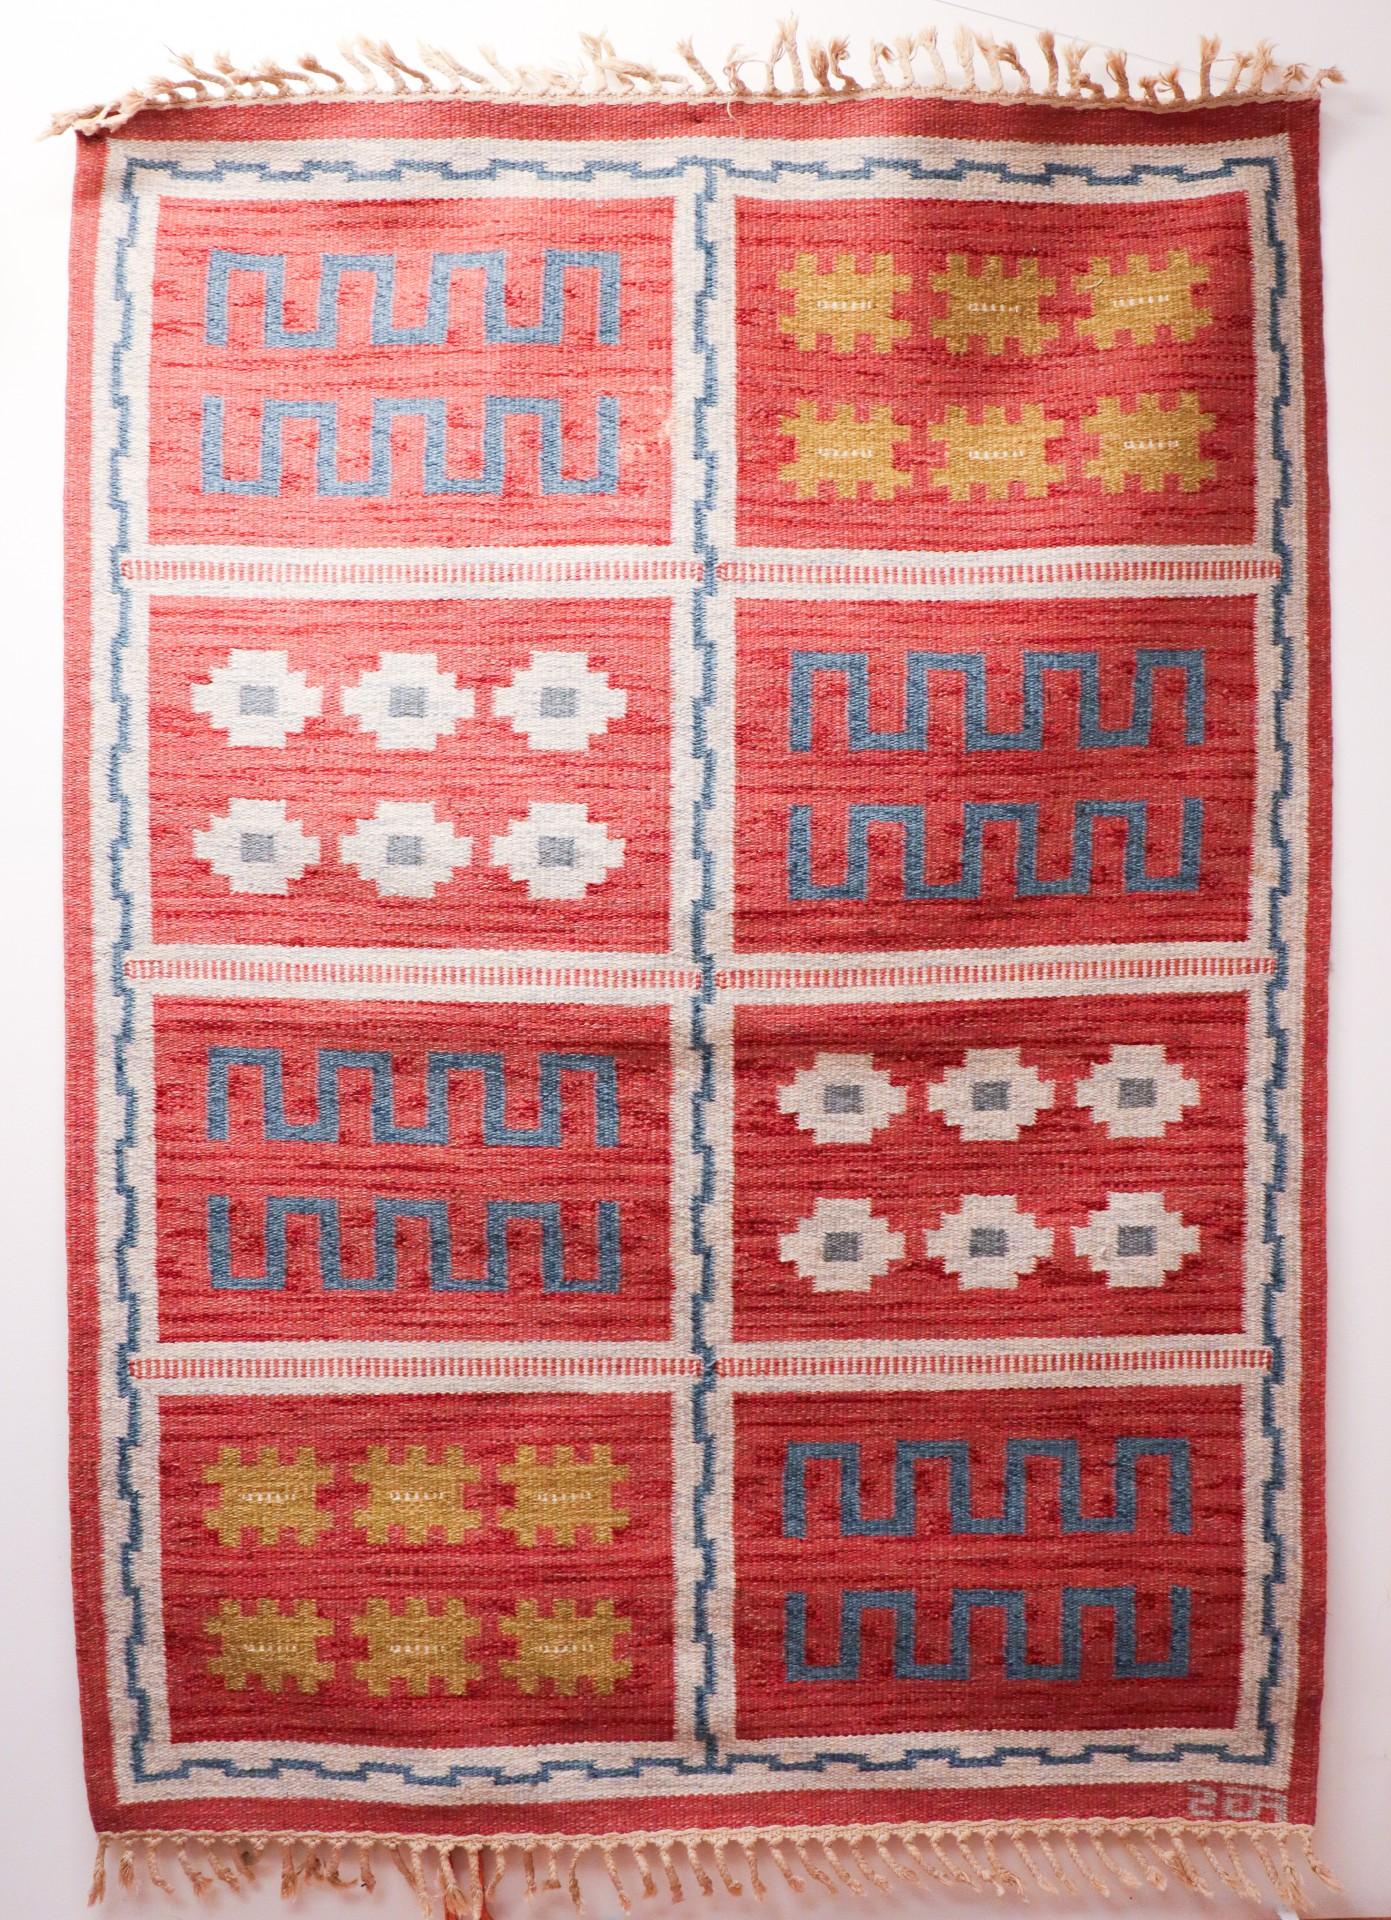 A vintage Swedish flat-weave by Anna-Greta Sjöqvist from the mid 20th century. It is 205 x 146 cm and in very good condition except from some minor stains and shows wear on the fringes. It is marked with her initial AGS. 